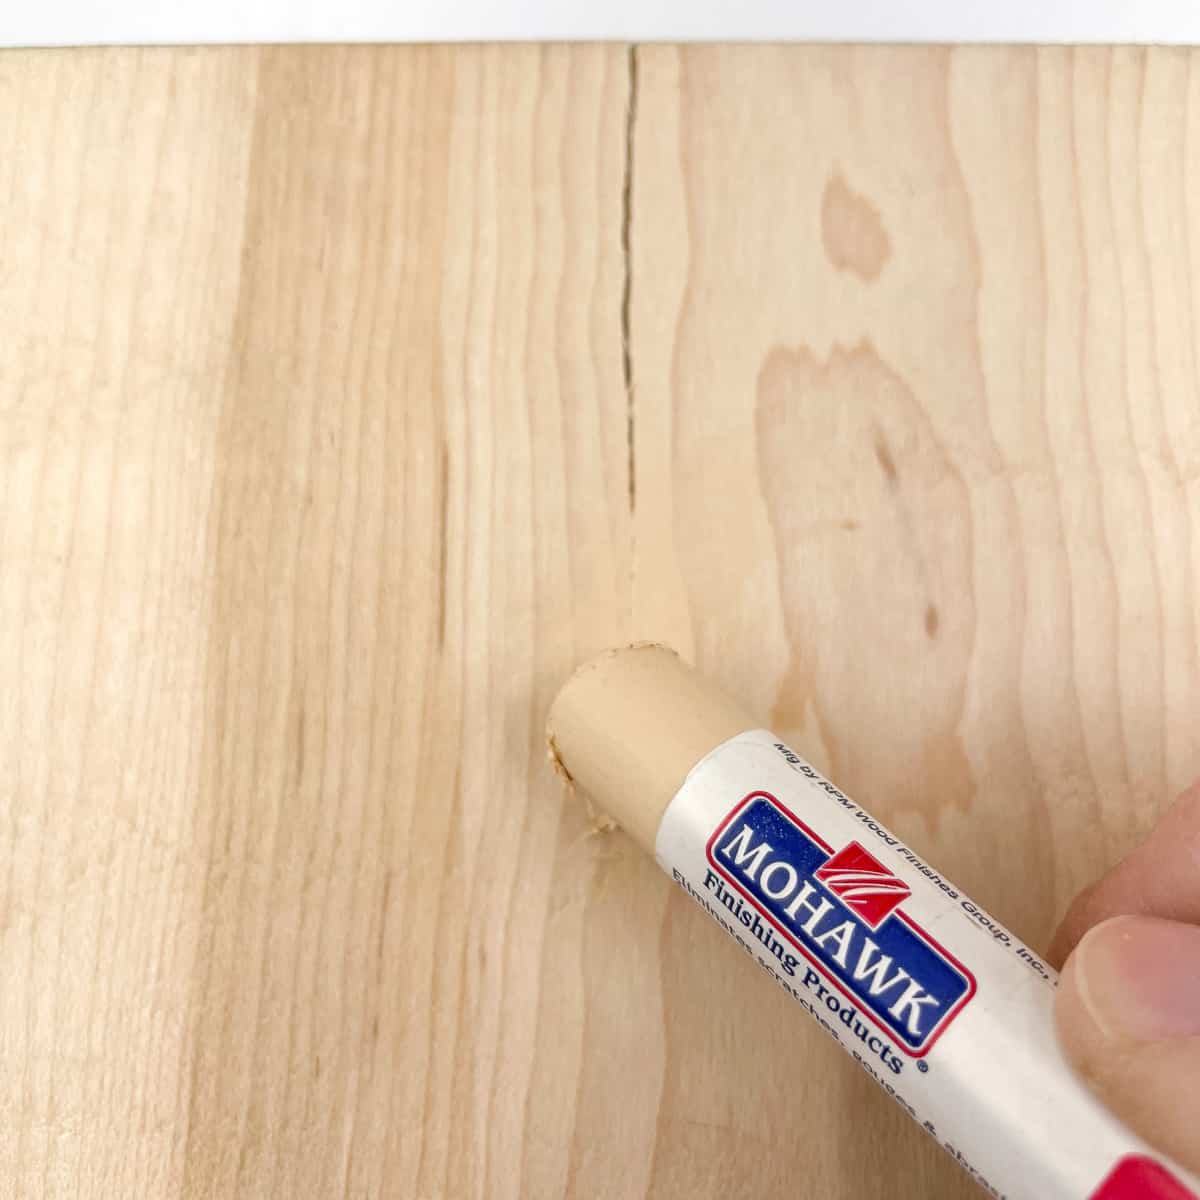 repairing a crack in wood with wood putty stick